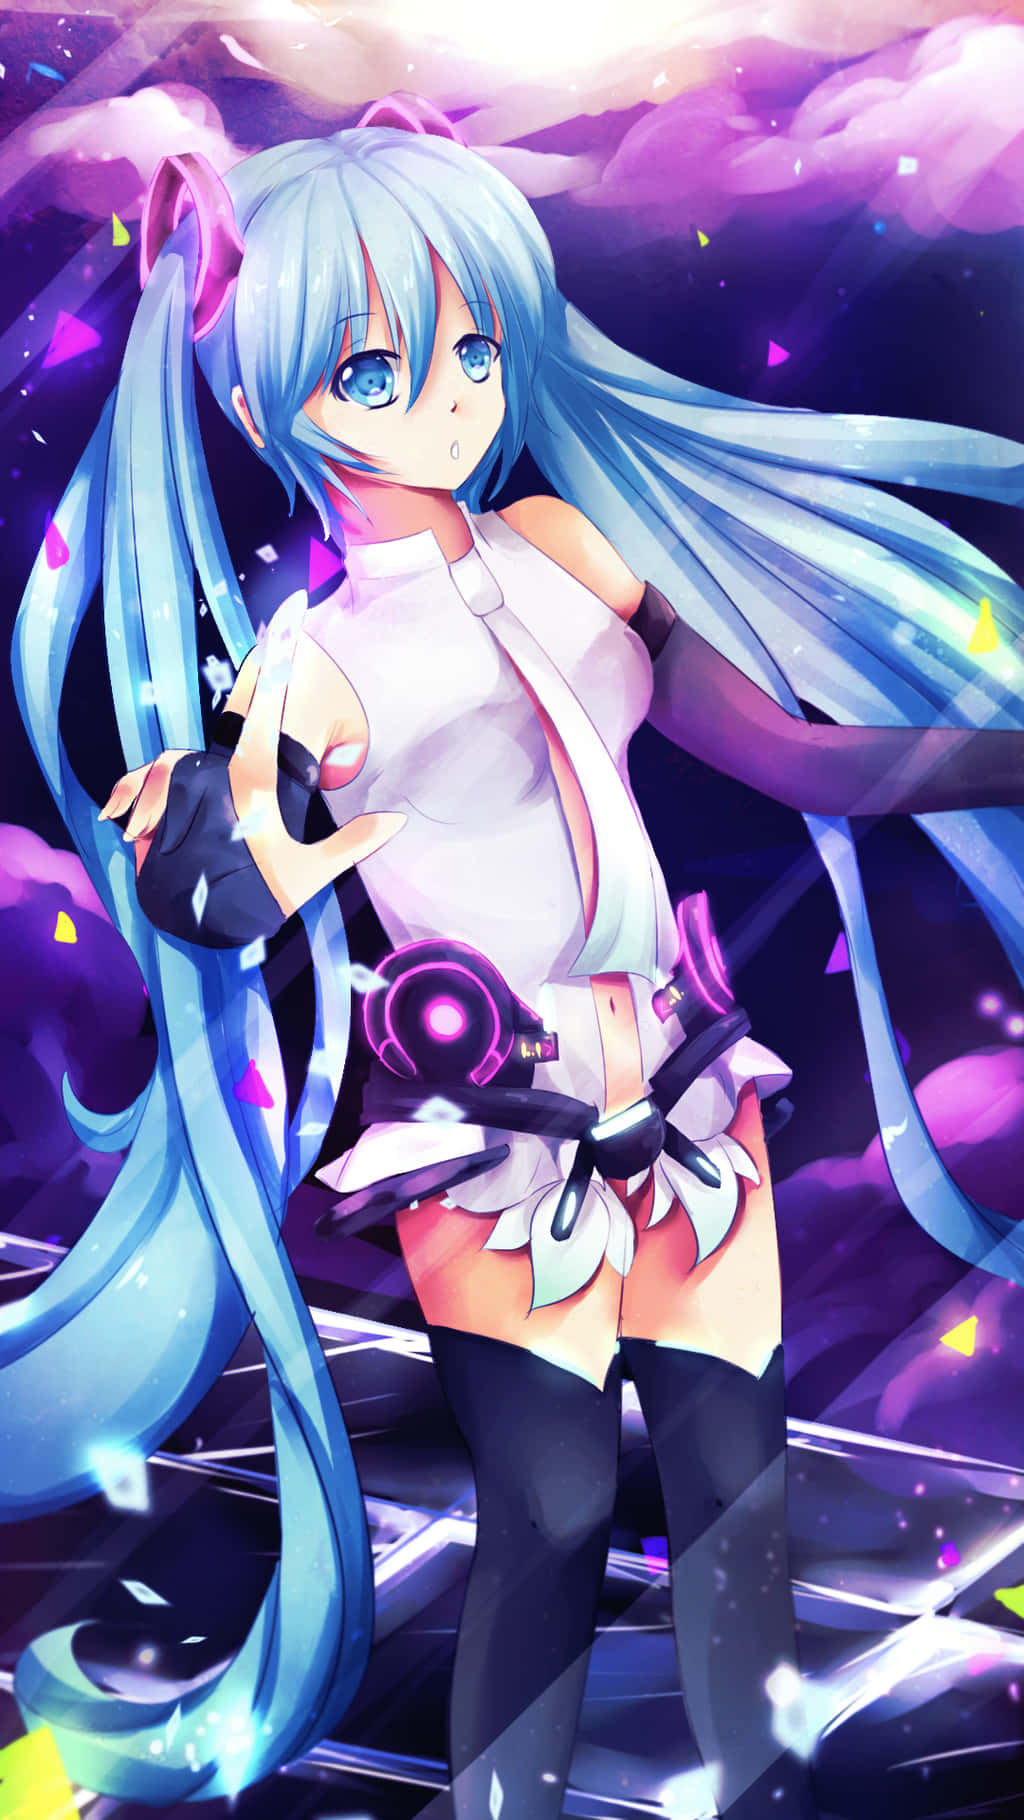 Feel the power of Hatsune Miku with her own phone Wallpaper